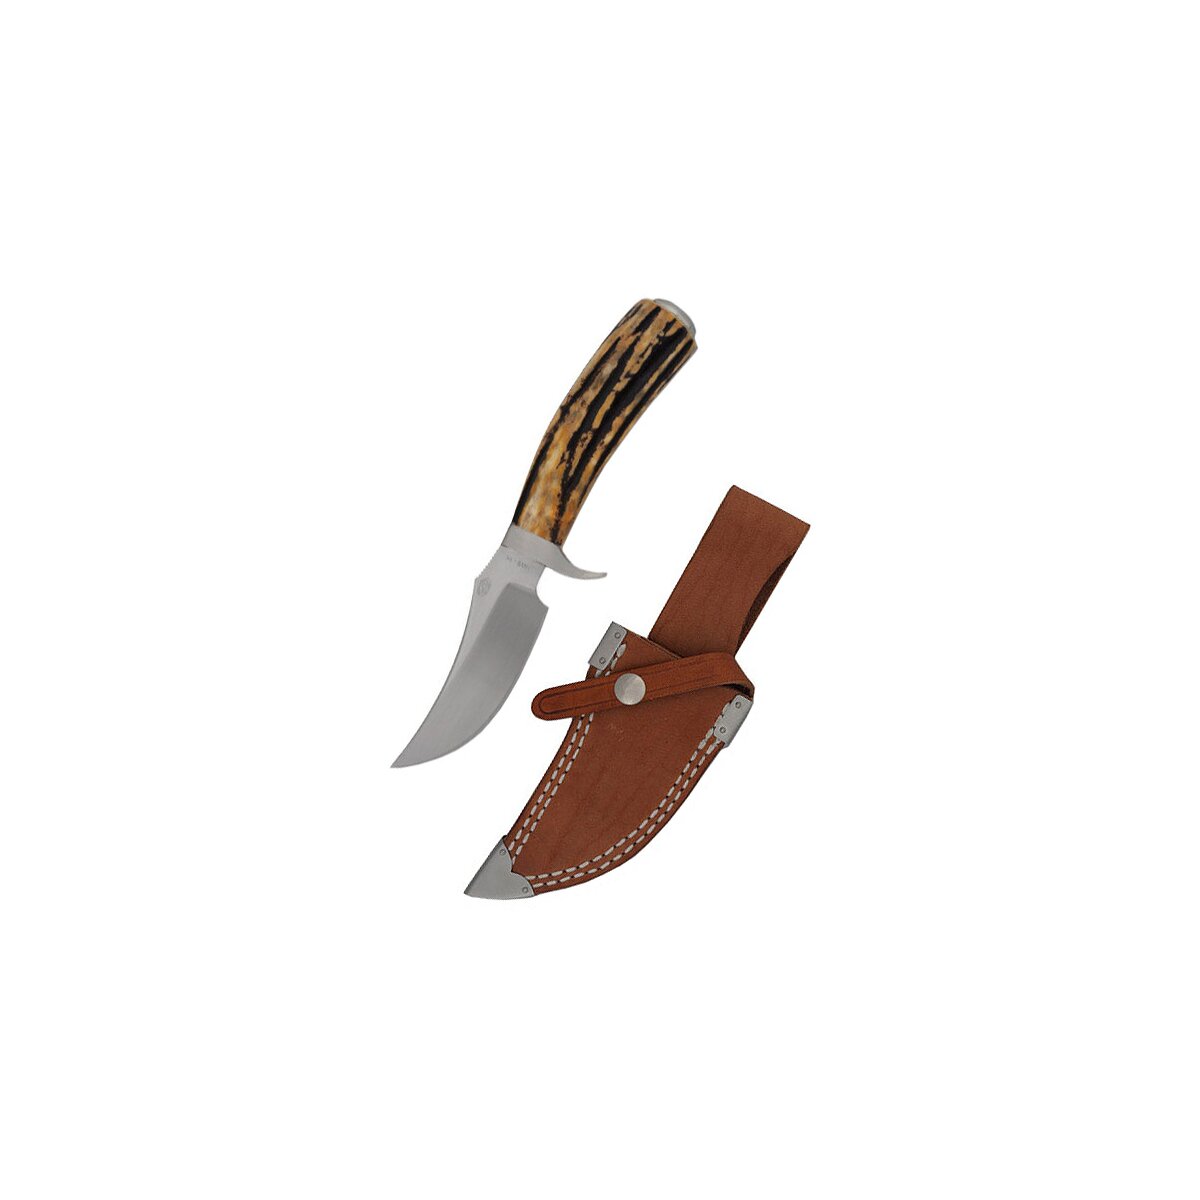 Blesbok knife with trailing point blade and deer horn handle